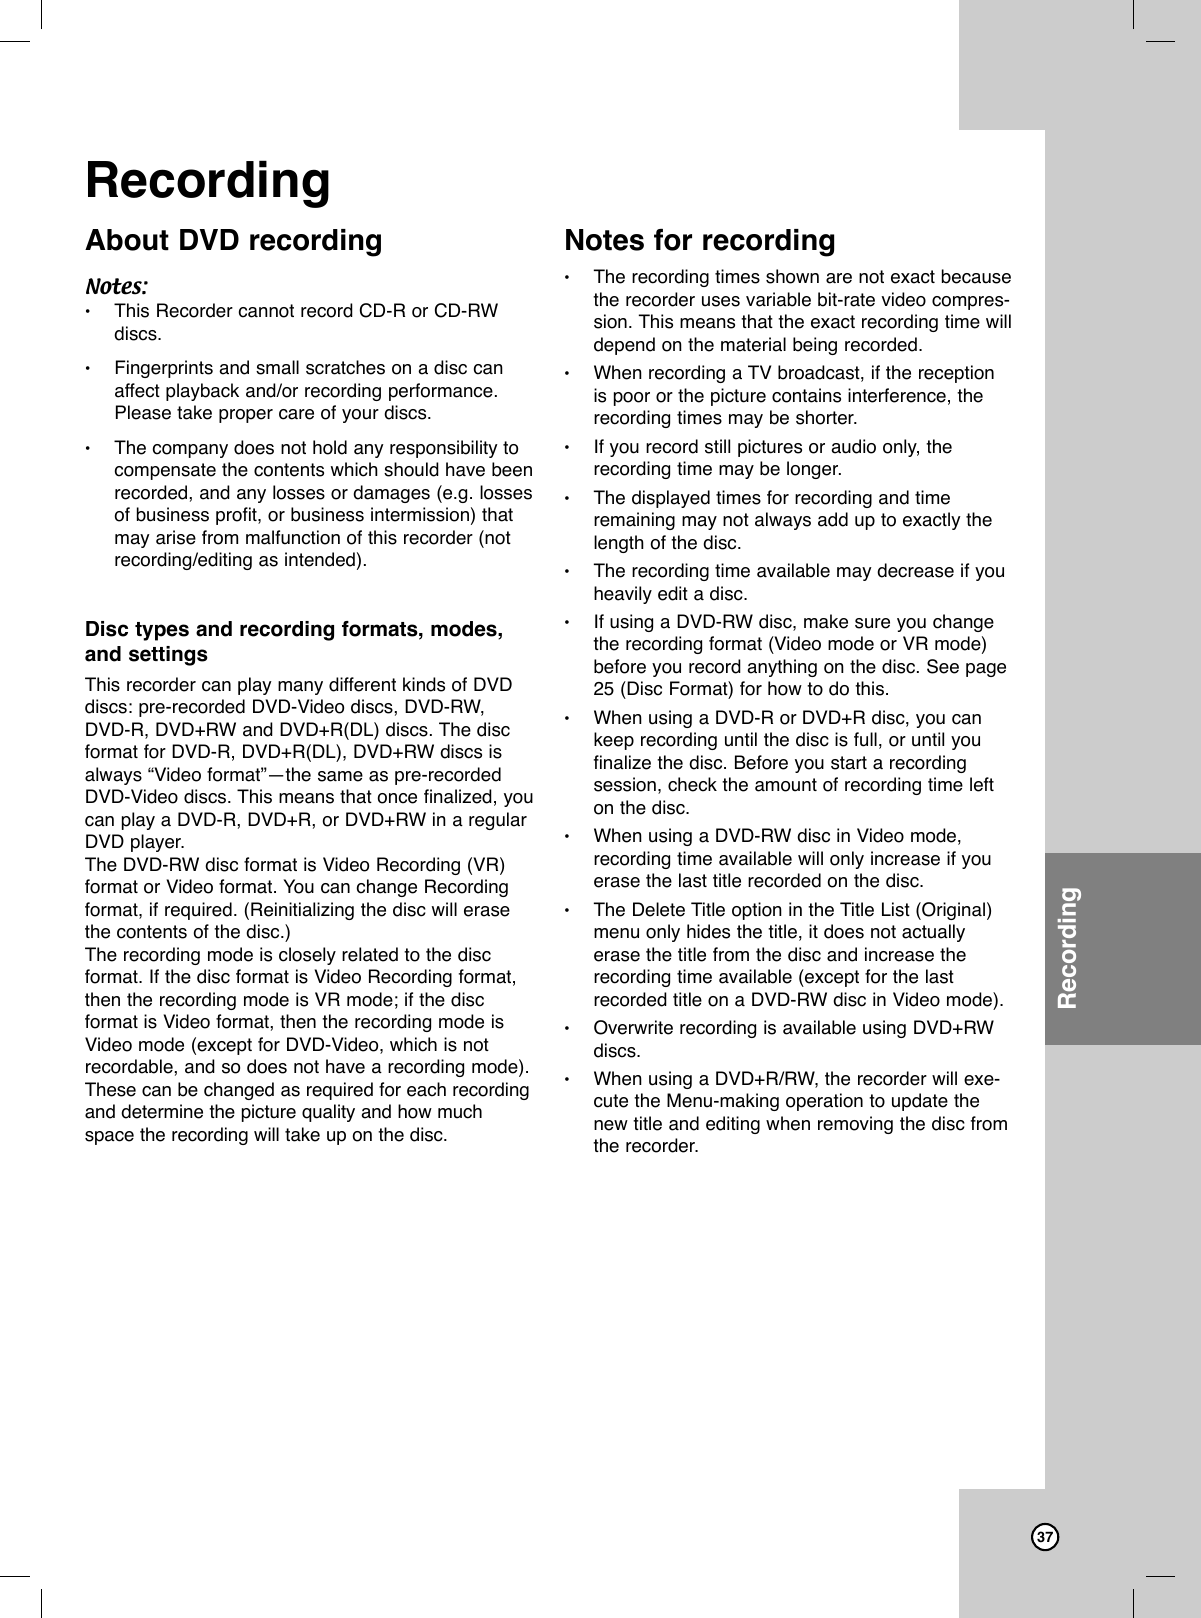 37About DVD recordingNotes:•This Recorder cannot record CD-R or CD-RWdiscs.•Fingerprints and small scratches on a disc canaffect playback and/or recording performance.Please take proper care of your discs.•The company does not hold any responsibility tocompensate the contents which should have beenrecorded, and any losses or damages (e.g. lossesof business profit, or business intermission) thatmay arise from malfunction of this recorder (notrecording/editing as intended). Disc types and recording formats, modes,and settingsThis recorder can play many different kinds of DVDdiscs: pre-recorded DVD-Video discs, DVD-RW, DVD-R, DVD+RW and DVD+R(DL) discs. The discformat for DVD-R, DVD+R(DL), DVD+RW discs isalways “Video format”—the same as pre-recordedDVD-Video discs. This means that once finalized, youcan play a DVD-R, DVD+R, or DVD+RW in a regularDVD player.The DVD-RW disc format is Video Recording (VR)format or Video format. You can change Recordingformat, if required. (Reinitializing the disc will erasethe contents of the disc.)The recording mode is closely related to the disc format. If the disc format is Video Recording format,then the recording mode is VR mode; if the disc format is Video format, then the recording mode isVideo mode (except for DVD-Video, which is notrecordable, and so does not have a recording mode).These can be changed as required for each recordingand determine the picture quality and how muchspace the recording will take up on the disc.Notes for recording•The recording times shown are not exact becausethe recorder uses variable bit-rate video compres-sion. This means that the exact recording time willdepend on the material being recorded.•When recording a TV broadcast, if the receptionis poor or the picture contains interference, therecording times may be shorter.•If you record still pictures or audio only, therecording time may be longer.•The displayed times for recording and timeremaining may not always add up to exactly thelength of the disc.•The recording time available may decrease if youheavily edit a disc.•If using a DVD-RW disc, make sure you changethe recording format (Video mode or VR mode)before you record anything on the disc. See page25 (Disc Format) for how to do this.•When using a DVD-R or DVD+R disc, you cankeep recording until the disc is full, or until youfinalize the disc. Before you start a recording session, check the amount of recording time lefton the disc.•When using a DVD-RW disc in Video mode,recording time available will only increase if youerase the last title recorded on the disc.•The Delete Title option in the Title List (Original)menu only hides the title, it does not actuallyerase the title from the disc and increase therecording time available (except for the lastrecorded title on a DVD-RW disc in Video mode).•Overwrite recording is available using DVD+RWdiscs.•When using a DVD+R/RW, the recorder will exe-cute the Menu-making operation to update thenew title and editing when removing the disc fromthe recorder. RecordingRecording